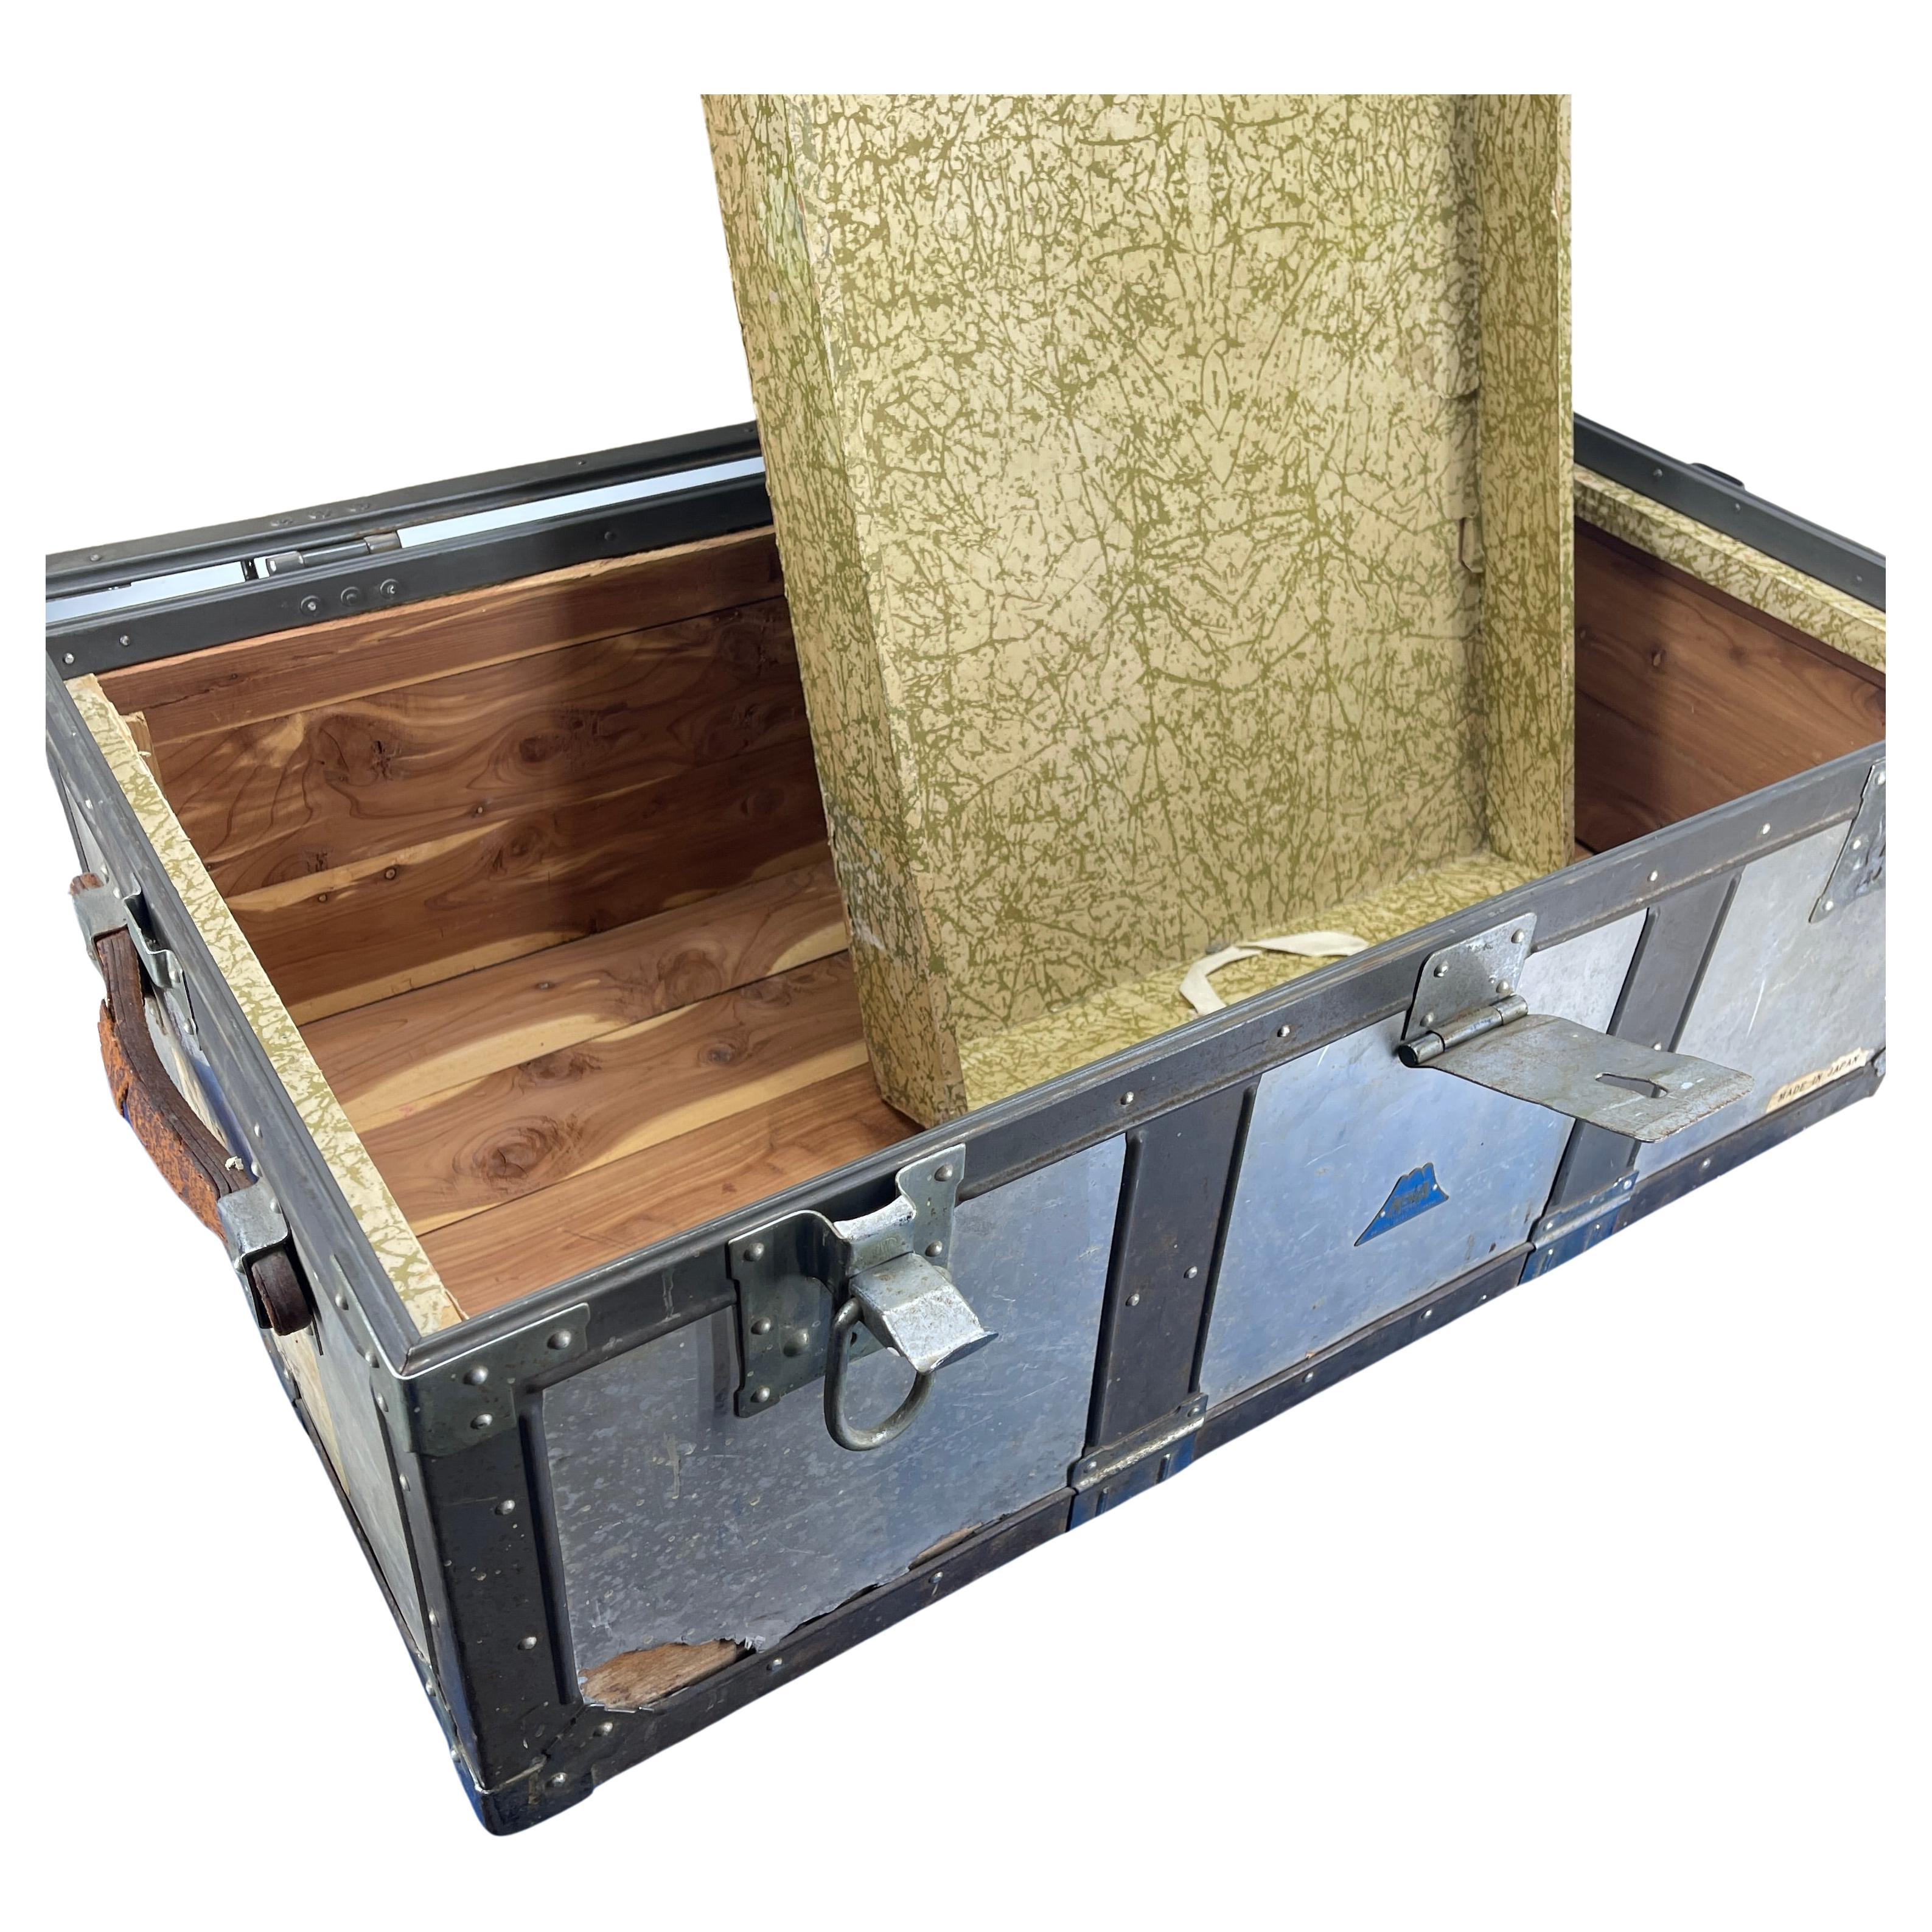 Korean war era military trunk by Kowa. Aluminum body with steel latches and leather handles. This is the real deal, when things were built to last. Stamps along the side reveal the soldier's name and journey. Use this trunk at the base of your bed,